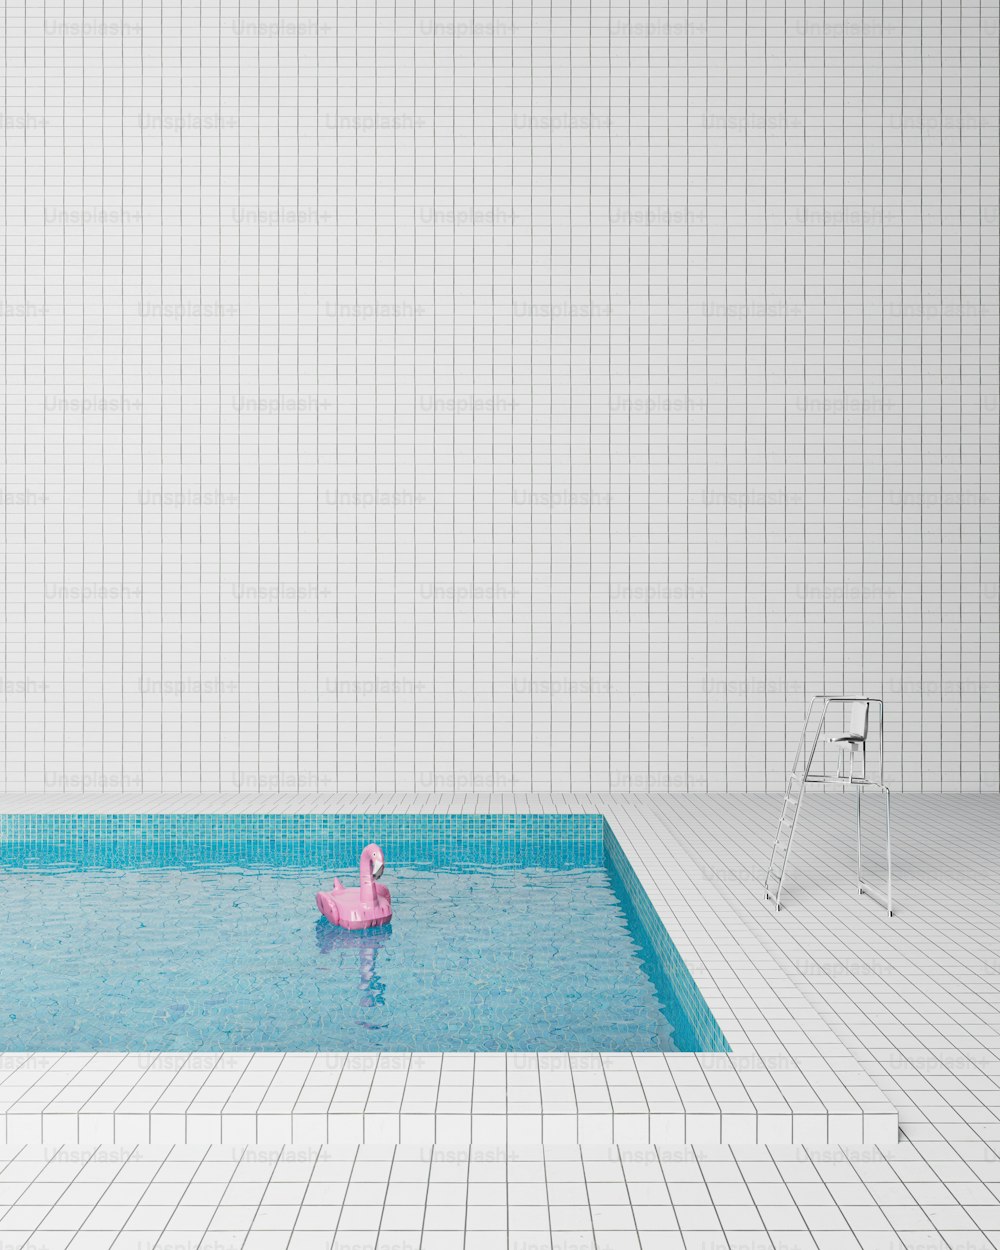 20+ Swimming Pool Pictures | Download Free Images & Stock Photos on Unsplash